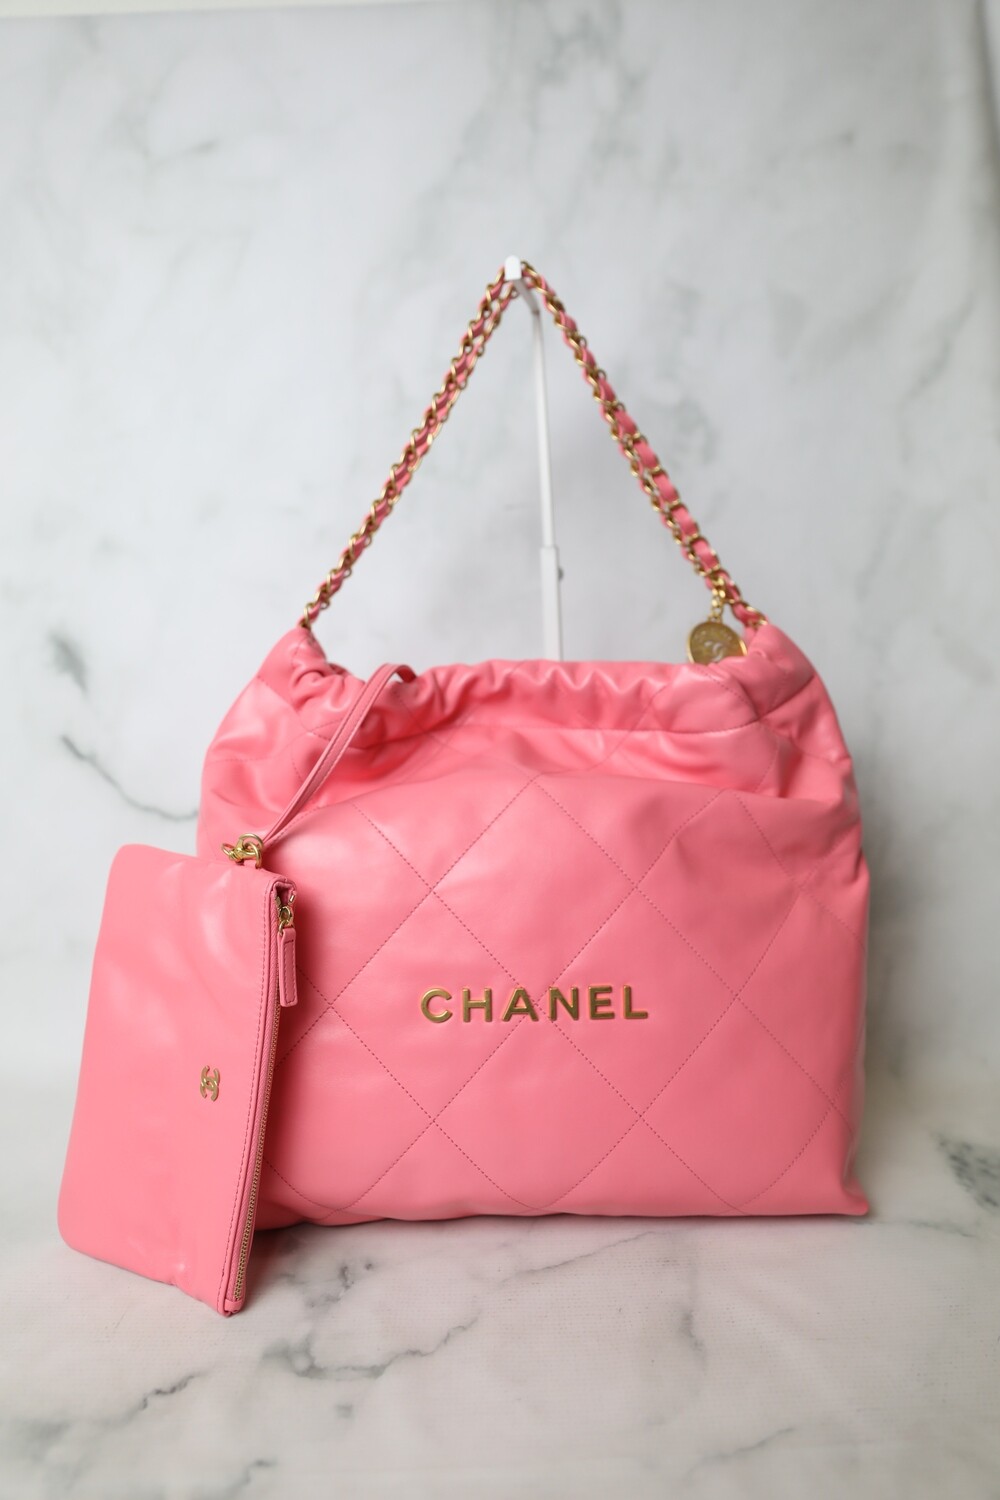 Chanel 22 Medium Quilted Hobo Tote, Pink Calfskin with Gold Hardware, New  in Box WA001 - Julia Rose Boston